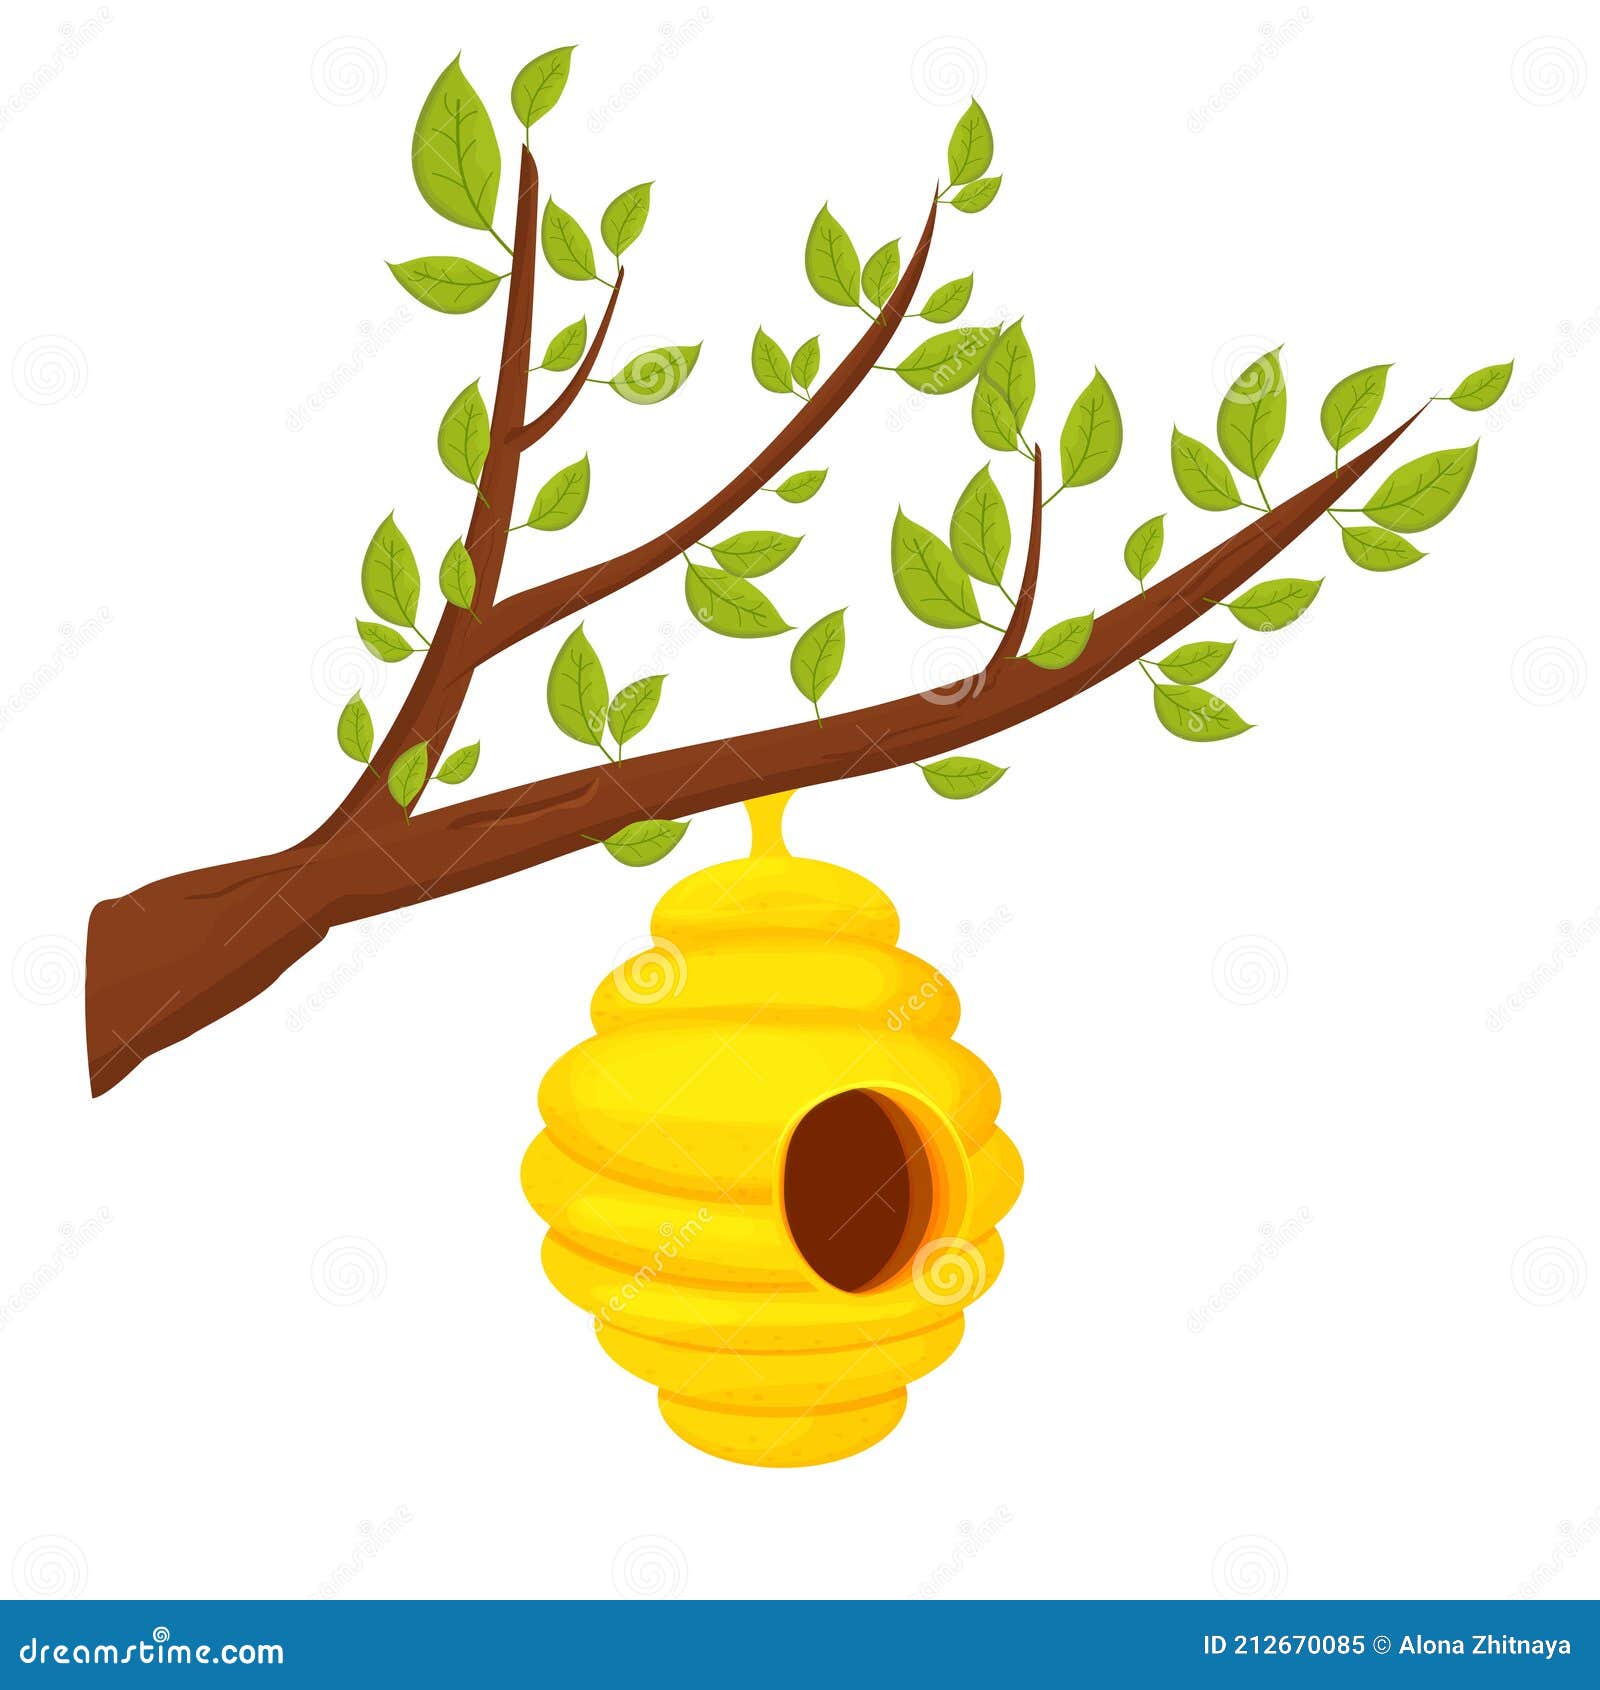 bee hive on tree branch in cartoon style  on white background. wild, hanging construction. bee colony home